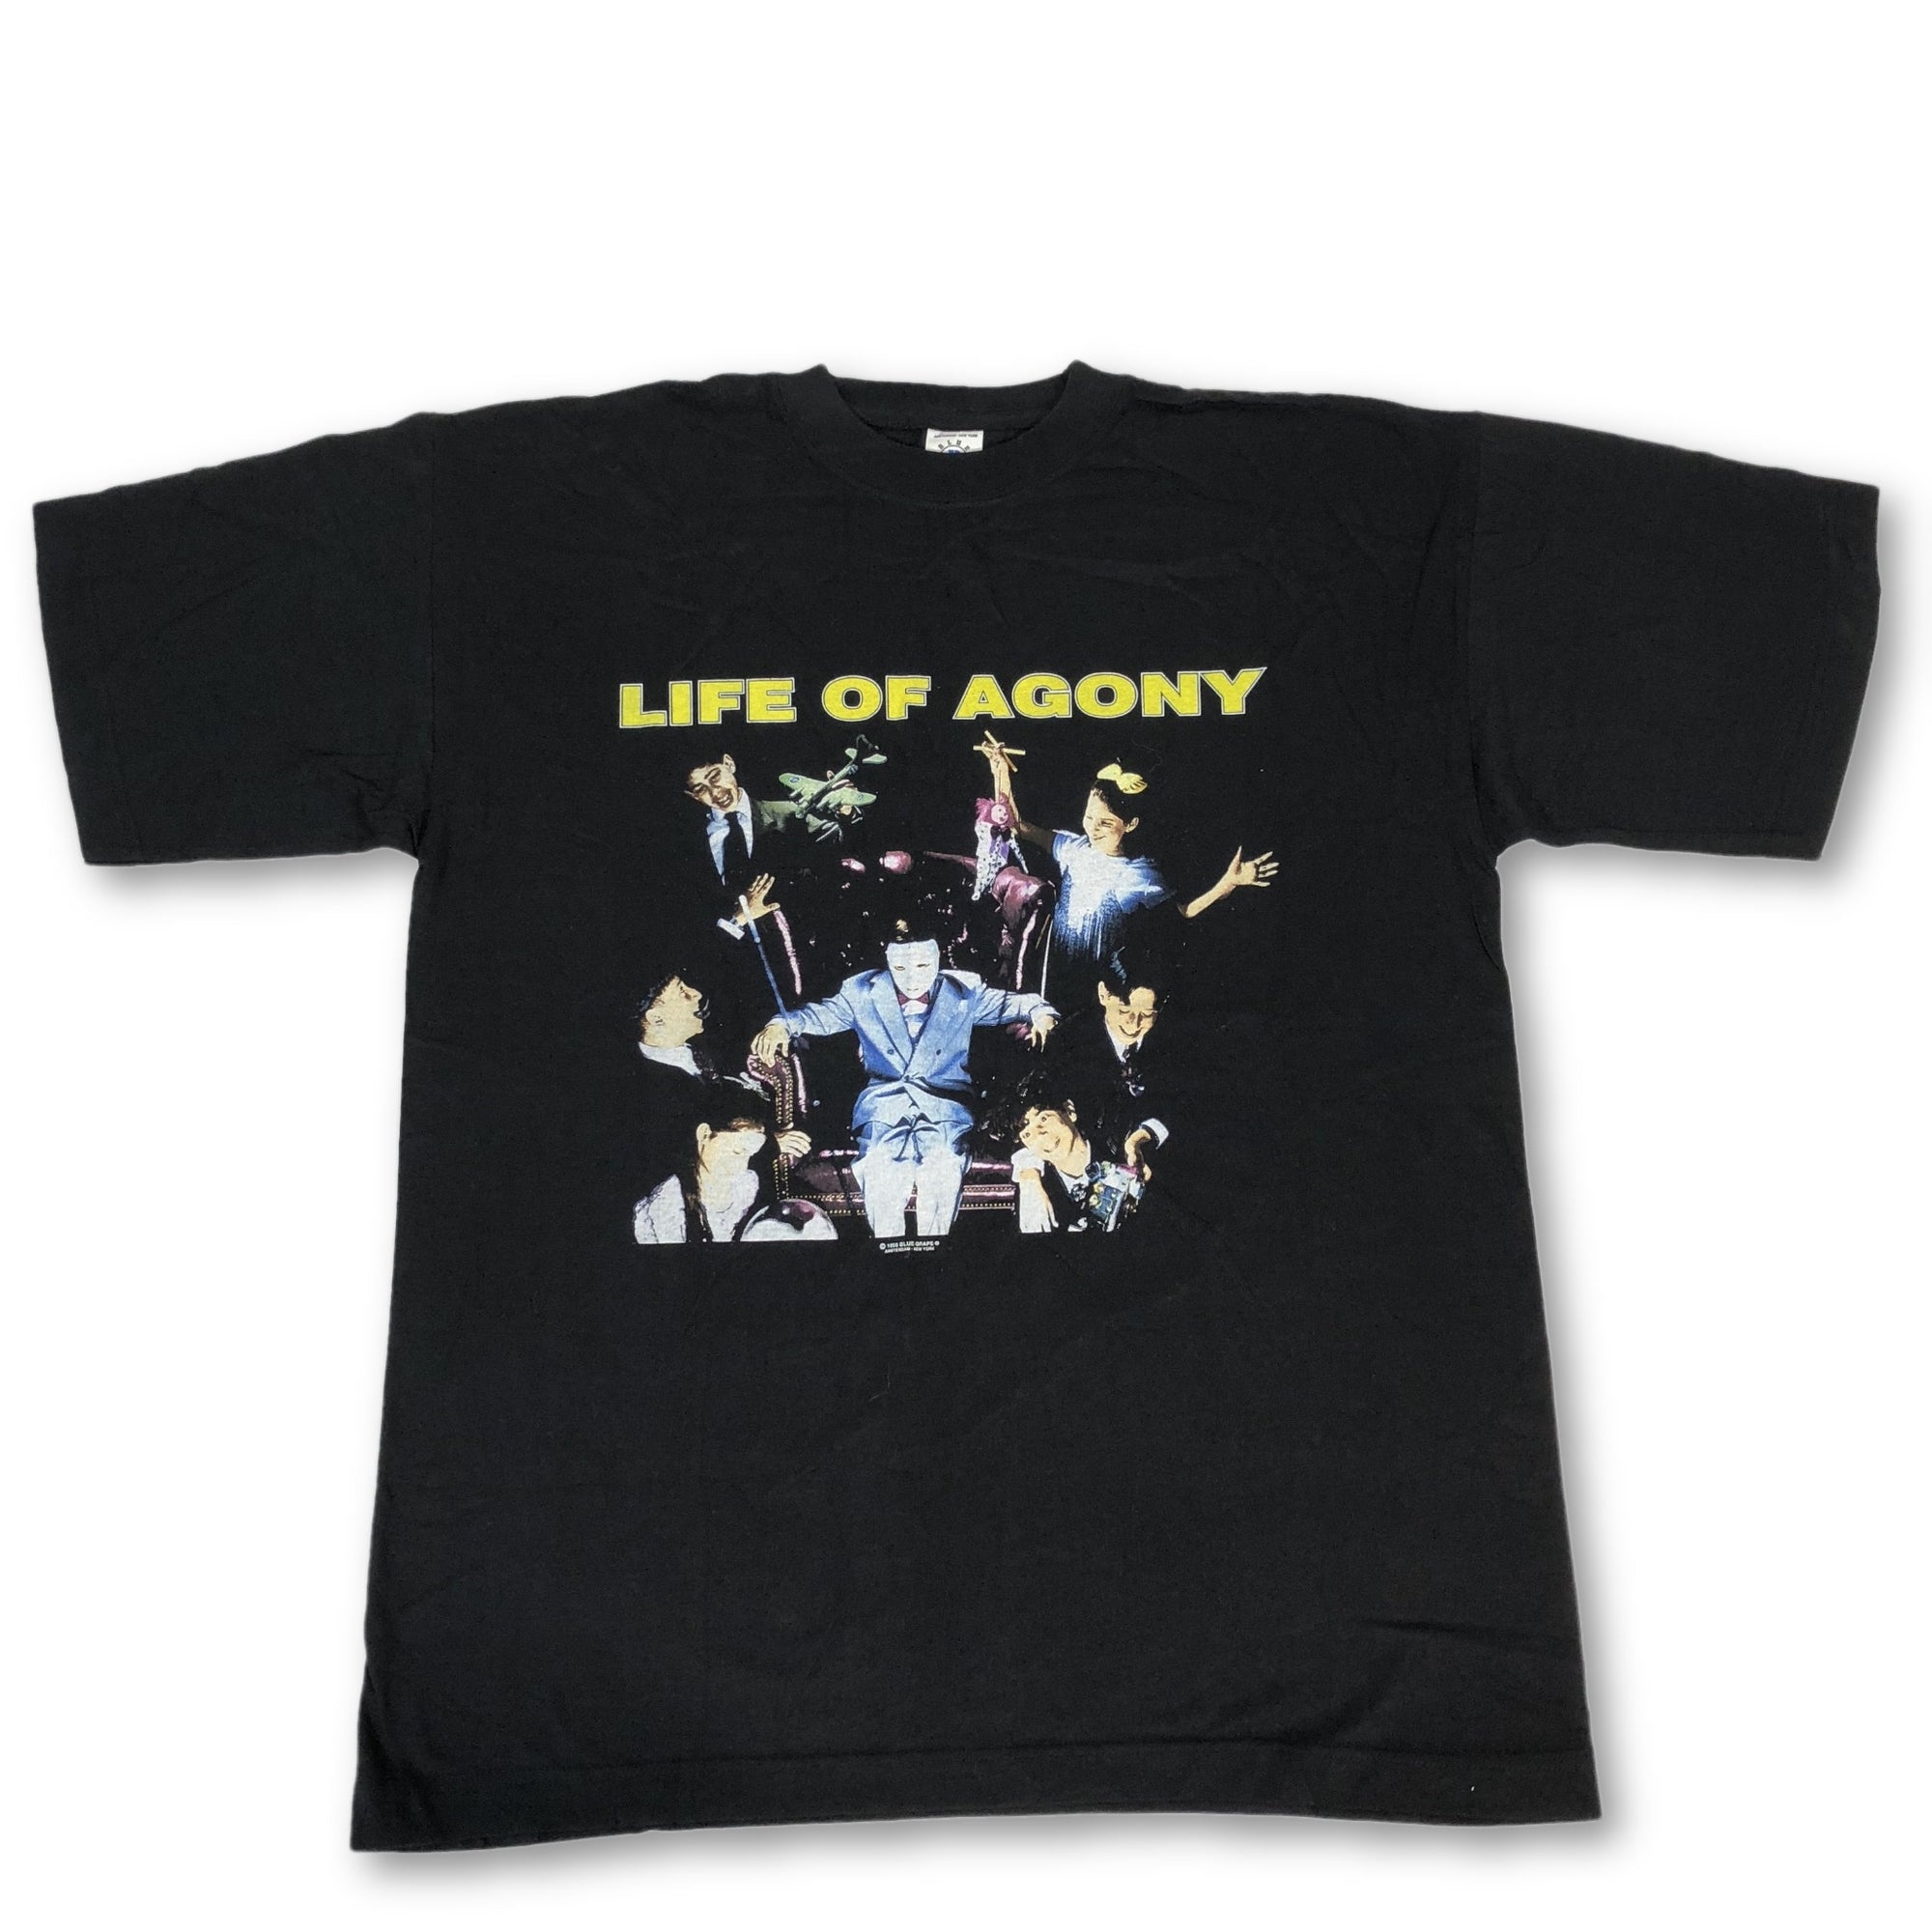 Vintage Life of Agony "Lost at 22" T-Shirt - jointcustodydc